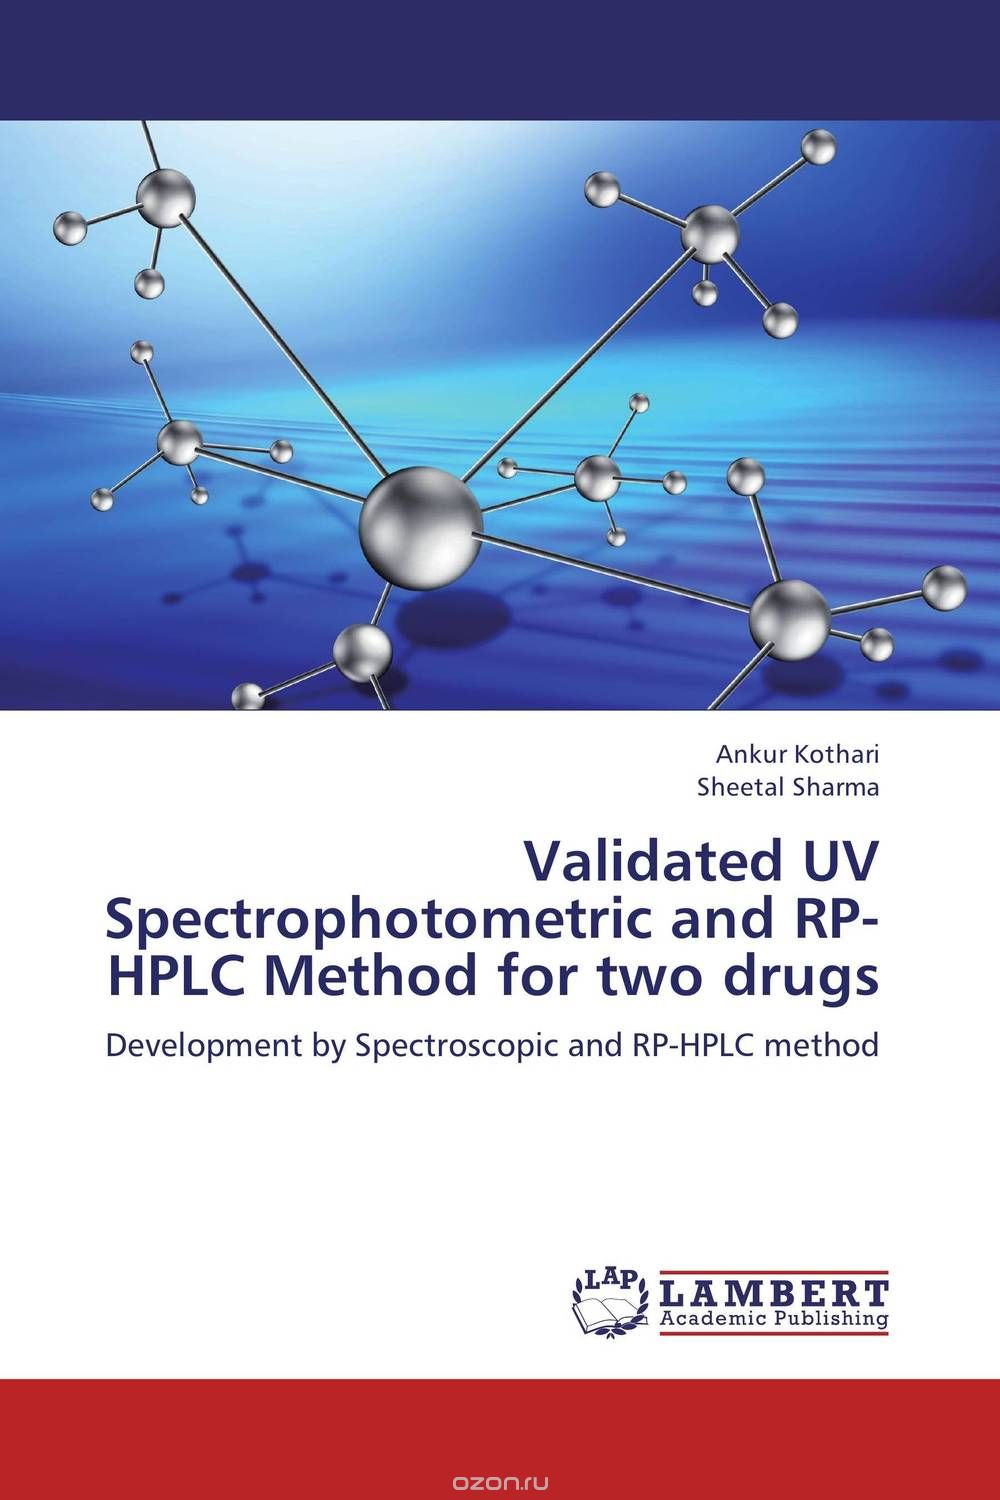 Validated UV Spectrophotometric and RP-HPLC Method for two drugs